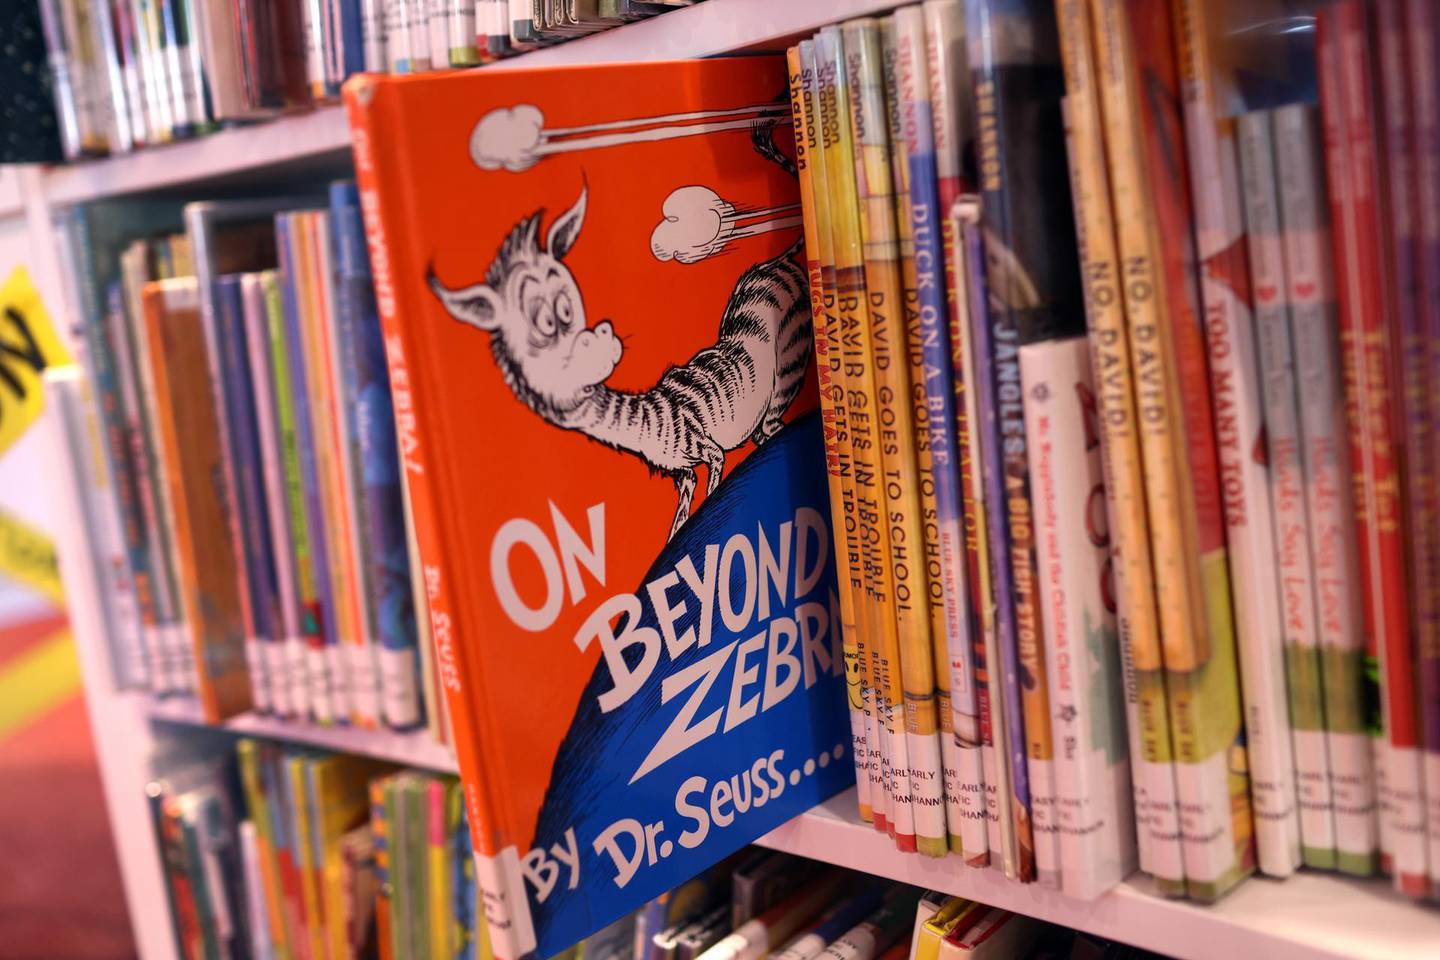 CHICAGO, ILLINOIS - MARCH 02: Books by Theodor Seuss Geisel, aka Dr. Seuss, including "On Beyond Zebra!" and "And to Think That I Saw it on Mulberry Street," are offered for loan at the Chinatown Branch of the Chicago Public Library on March 02, 2021 in Chicago, Illinois. The two titles are among six by the famed children's book author that will no longer be printed due to accusations of racist and insensitive imagery. The other titles include “If I Ran the Zoo,” “McElligot’s Pool,” “Scrambled Eggs Super!" and “The Cat’s Quizzer.” (Photo Illustration by Scott Olson/Getty Images)
== FOR NEWSPAPERS, INTERNET, TELCOS & TELEVISION USE ONLY ==
